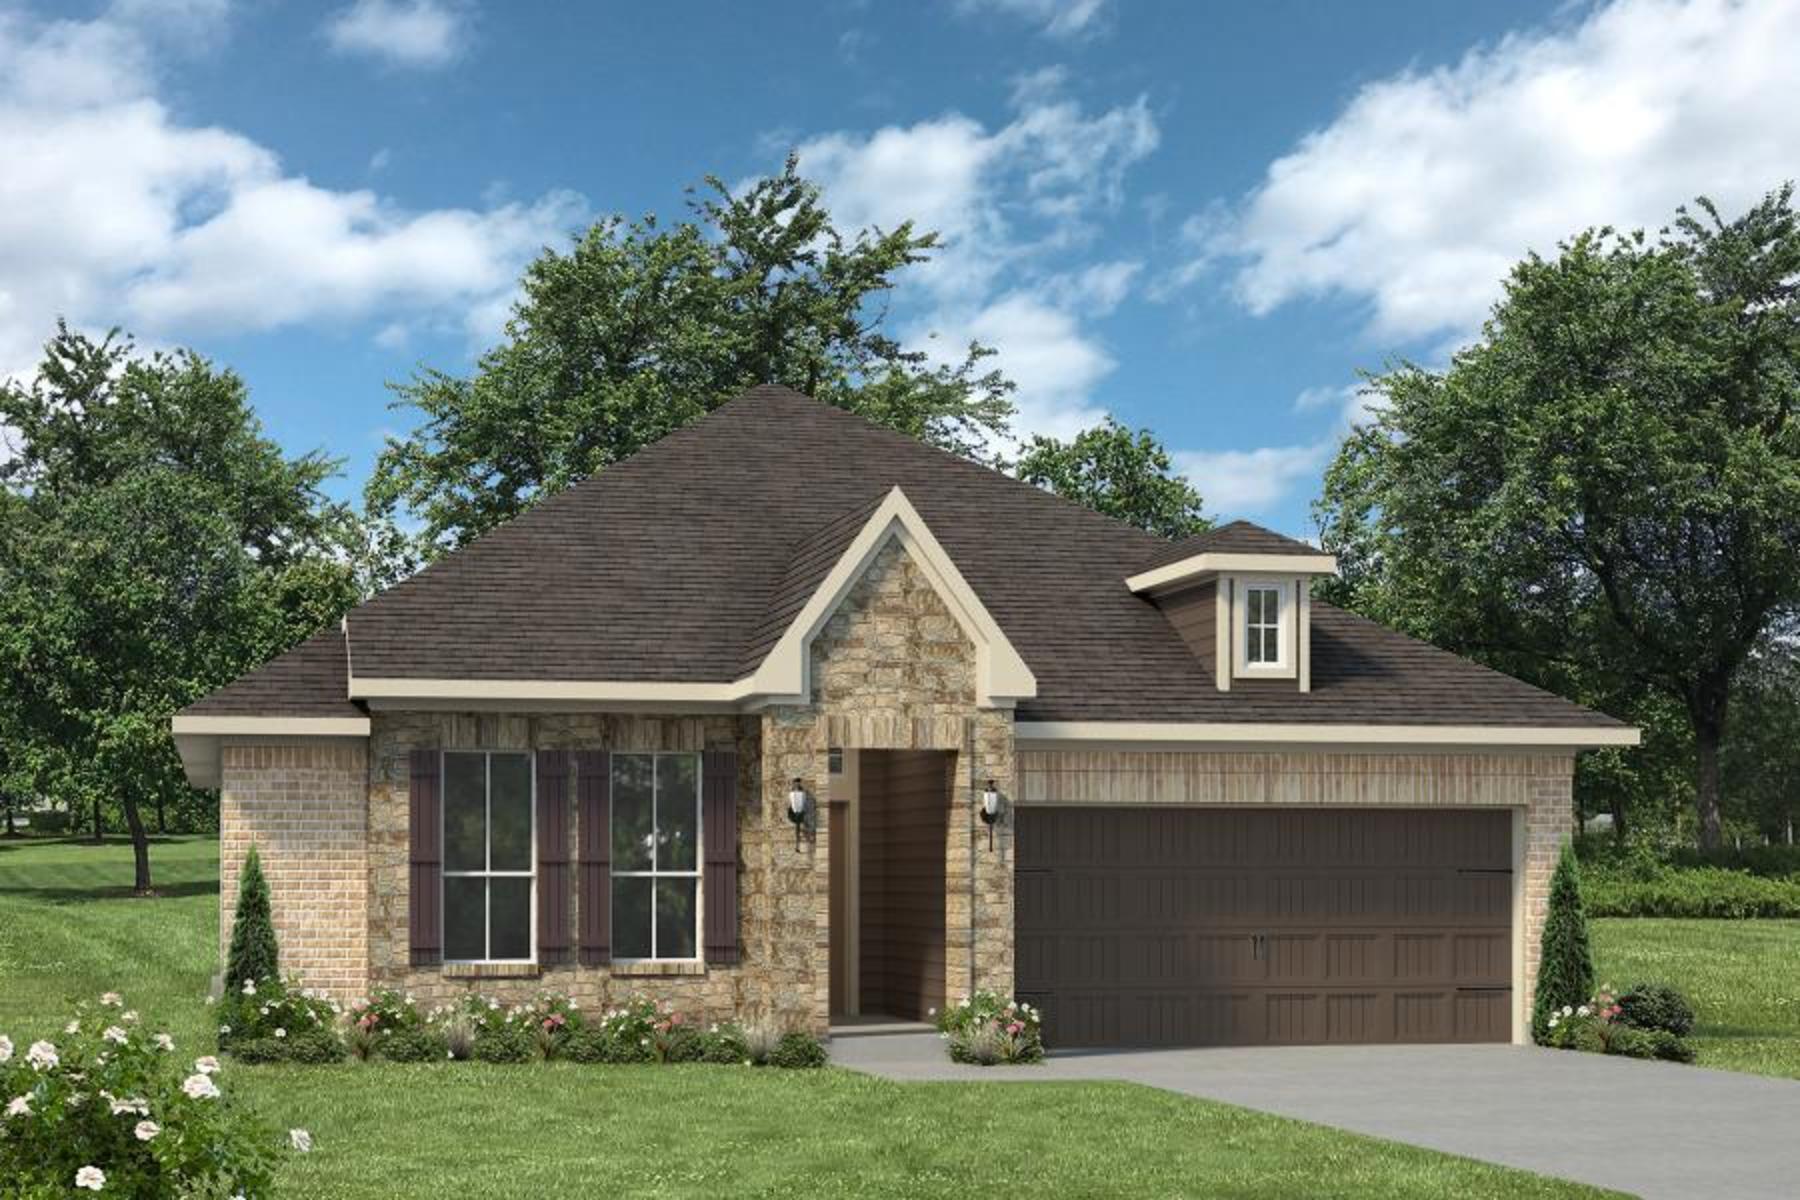 https://myhome.anewgo.com/client/stylecraft/community/Build%20On%20Your%20Lot/plan/1514%20%7C%20Bedford%20Classic?elevId=22. 1,514sf New Home